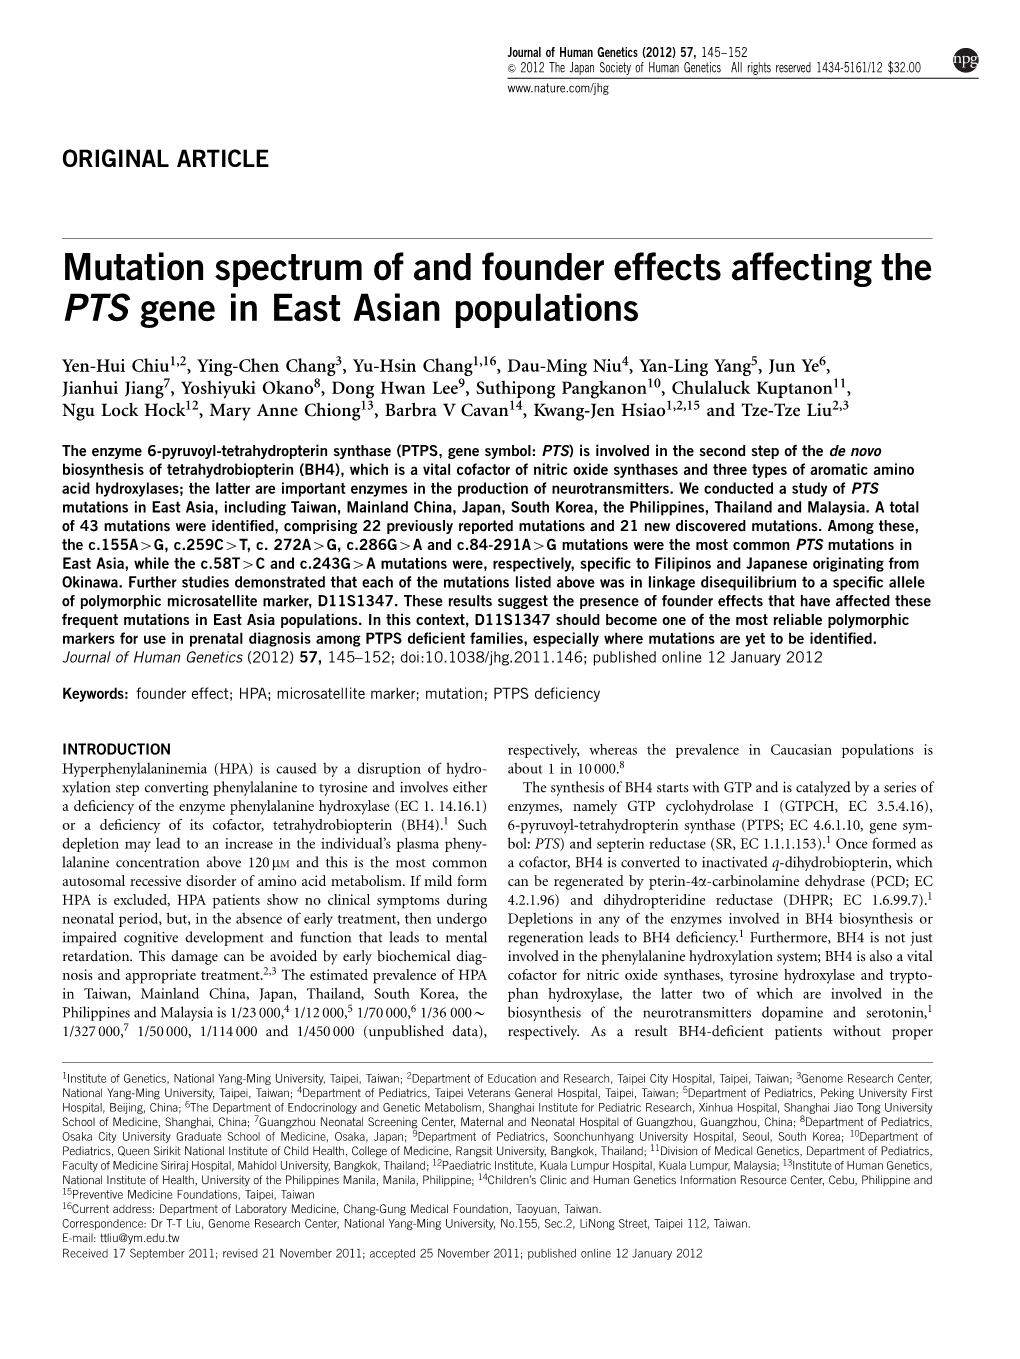 Mutation Spectrum of and Founder Effects Affecting the PTS Gene in East Asian Populations